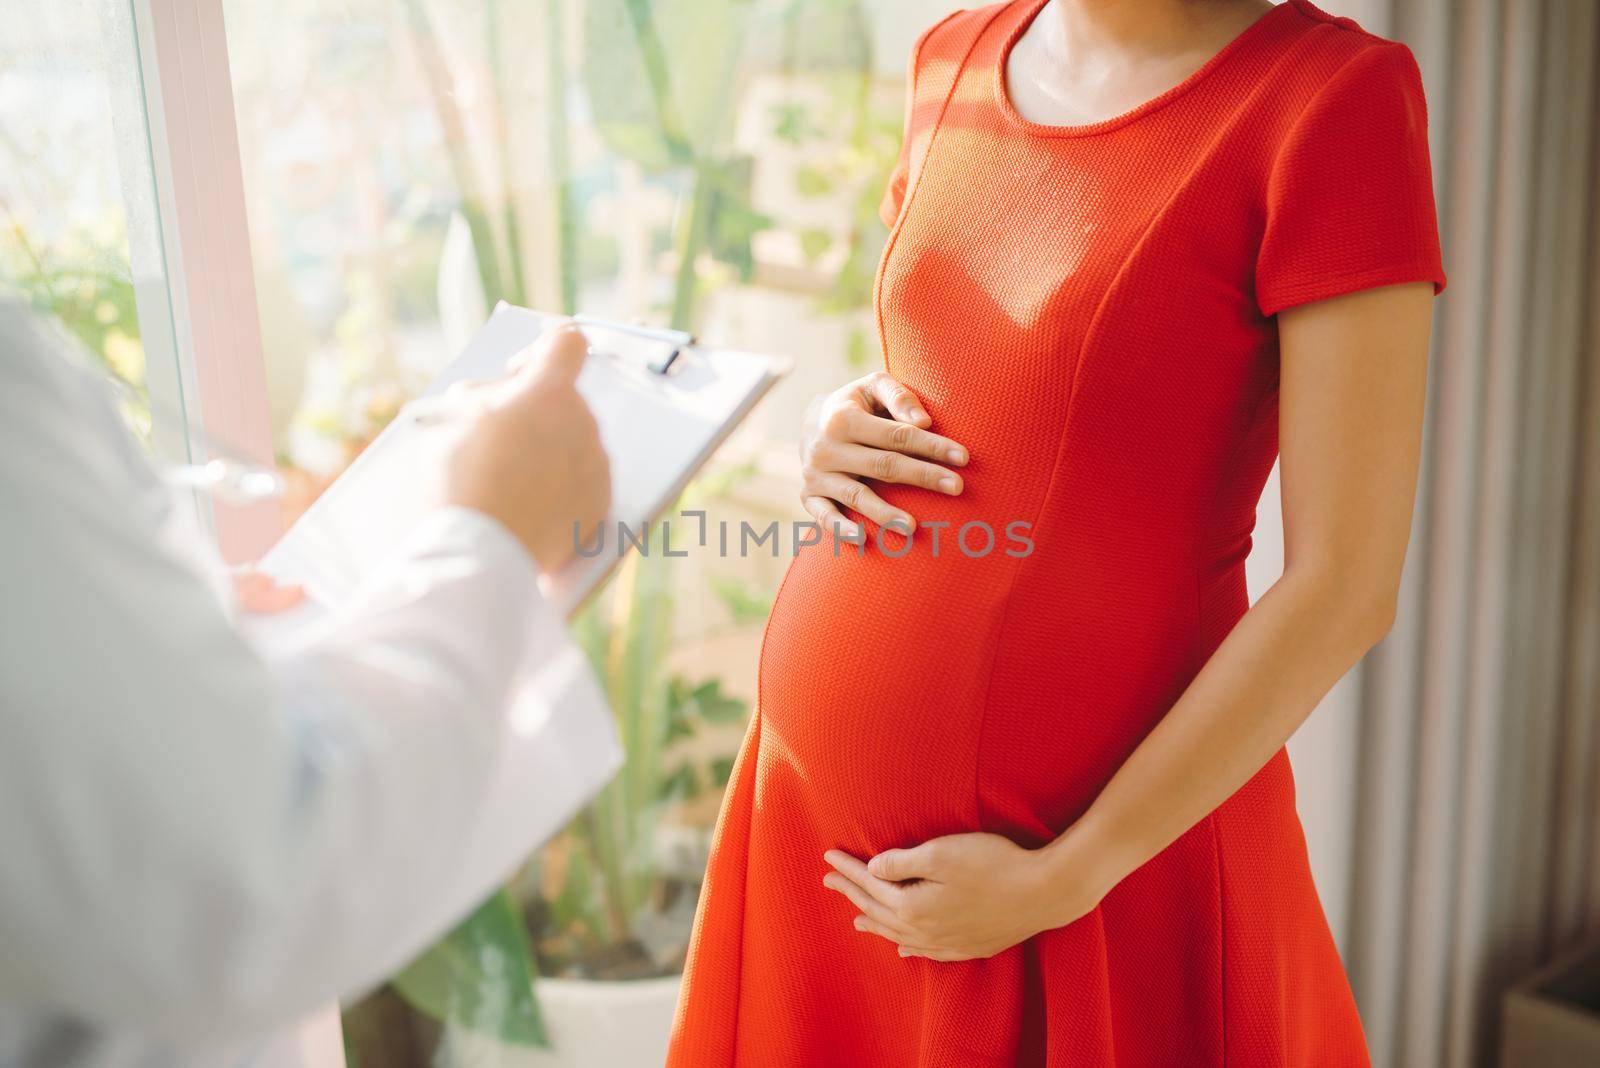 Doctor talking with pregnant woman and giving her explications isolated near window